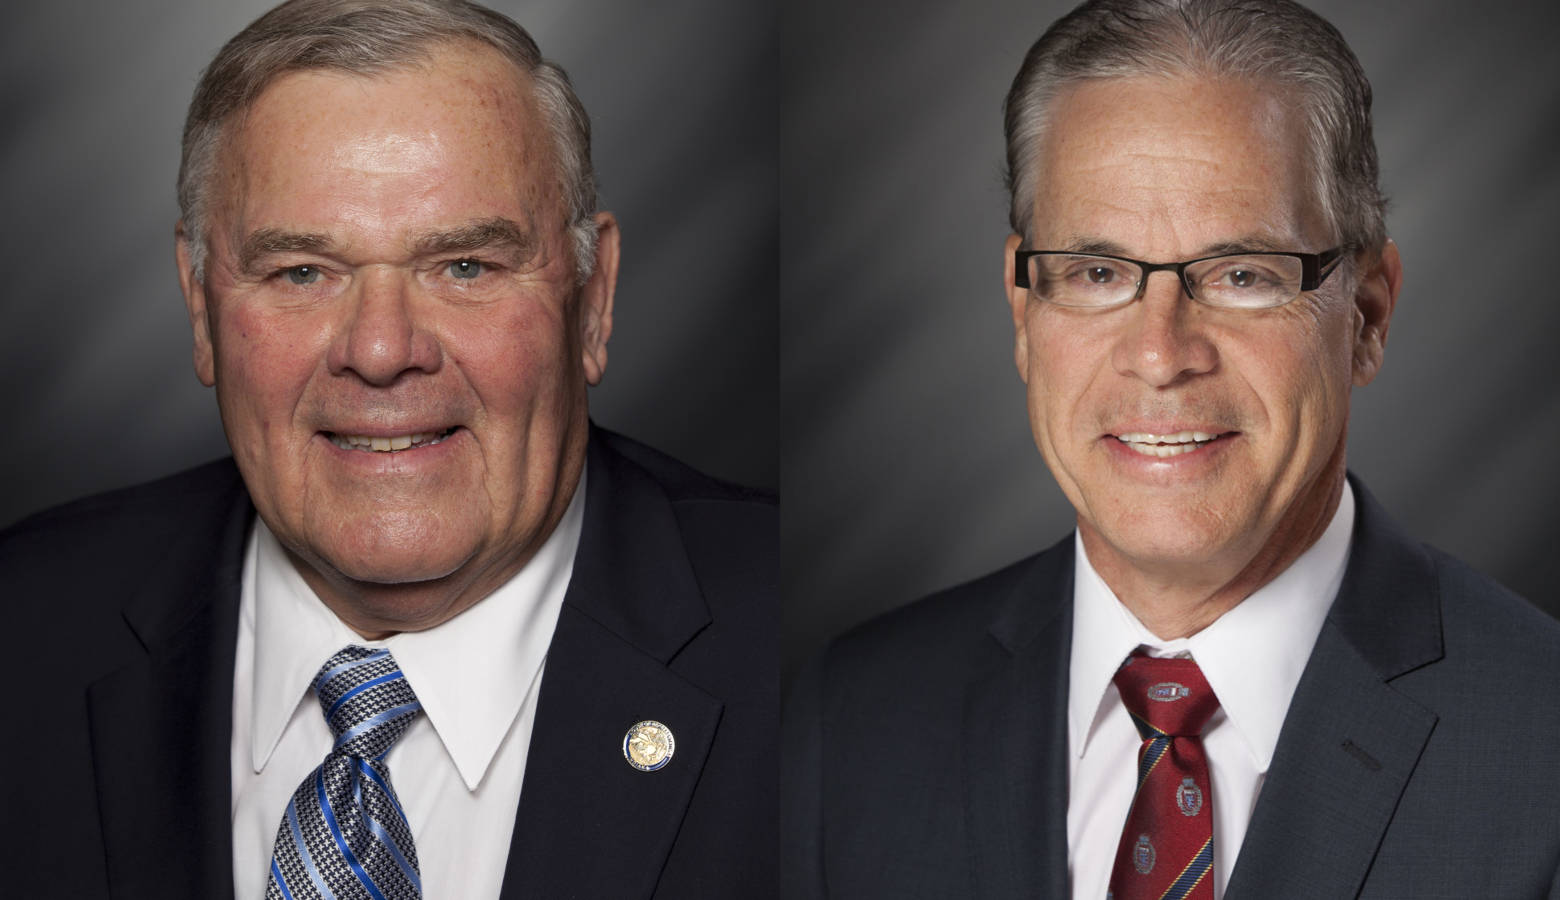 4th Congressional district Republican nominee Rep. Jim Baird (R-Greencastle), left, and Republican Senate candidate Mike Braun - a former state lawmaker - weathered significant attacks for their votes to raise the state’s gas tax 10 cents. (Courtesy India